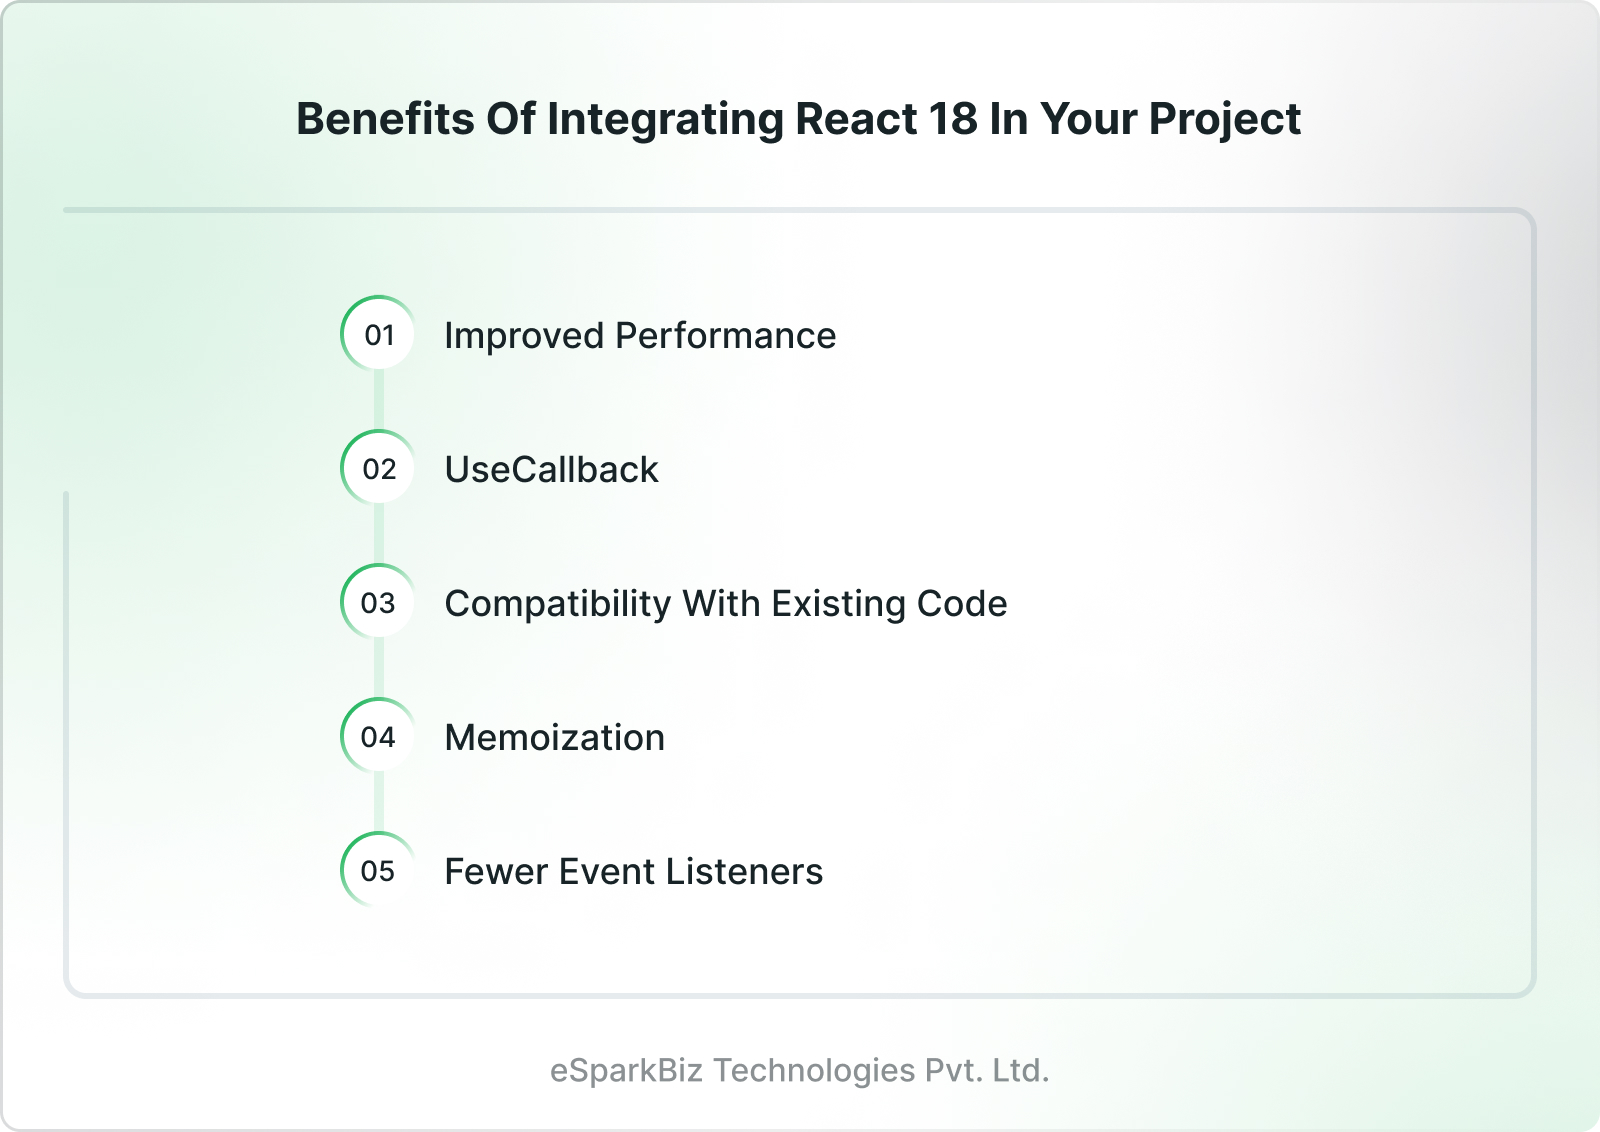 Benefits of Integrating React 18 in Your Project